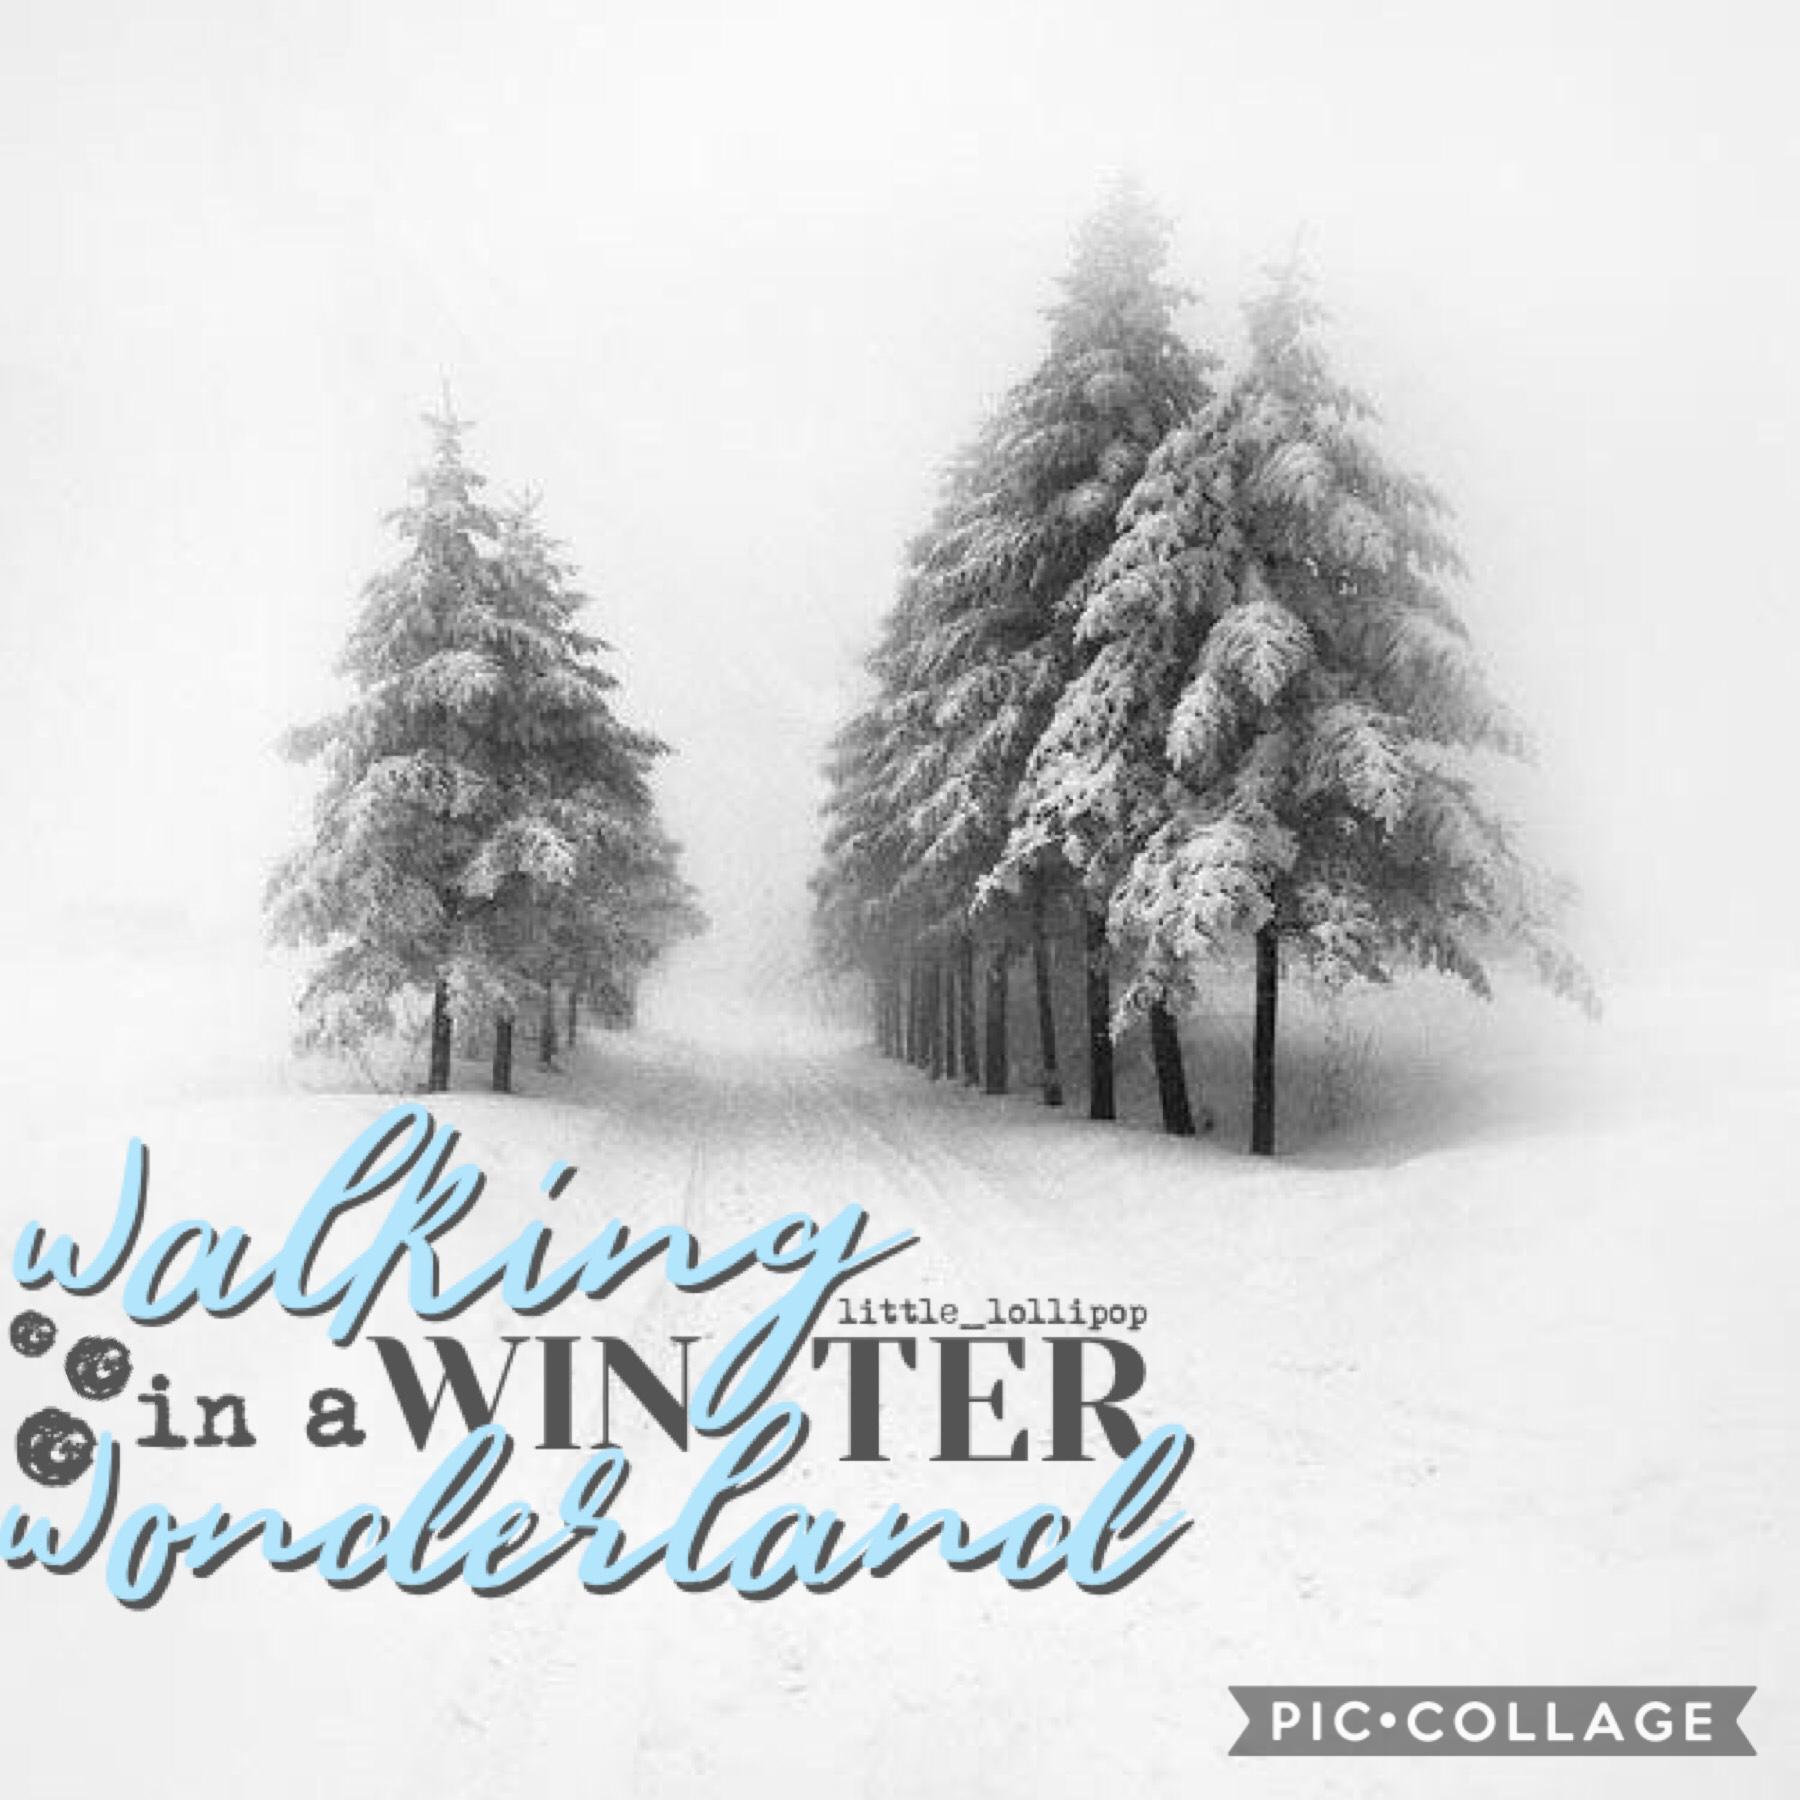 here’s a wintery collage cause it snowed where i live! ☃️🌬 it didn’t snow a lot but it makes cate happy🌨  i took a pic and put it in the remixes if u want to see❄️ btw i just love these new fonts!!